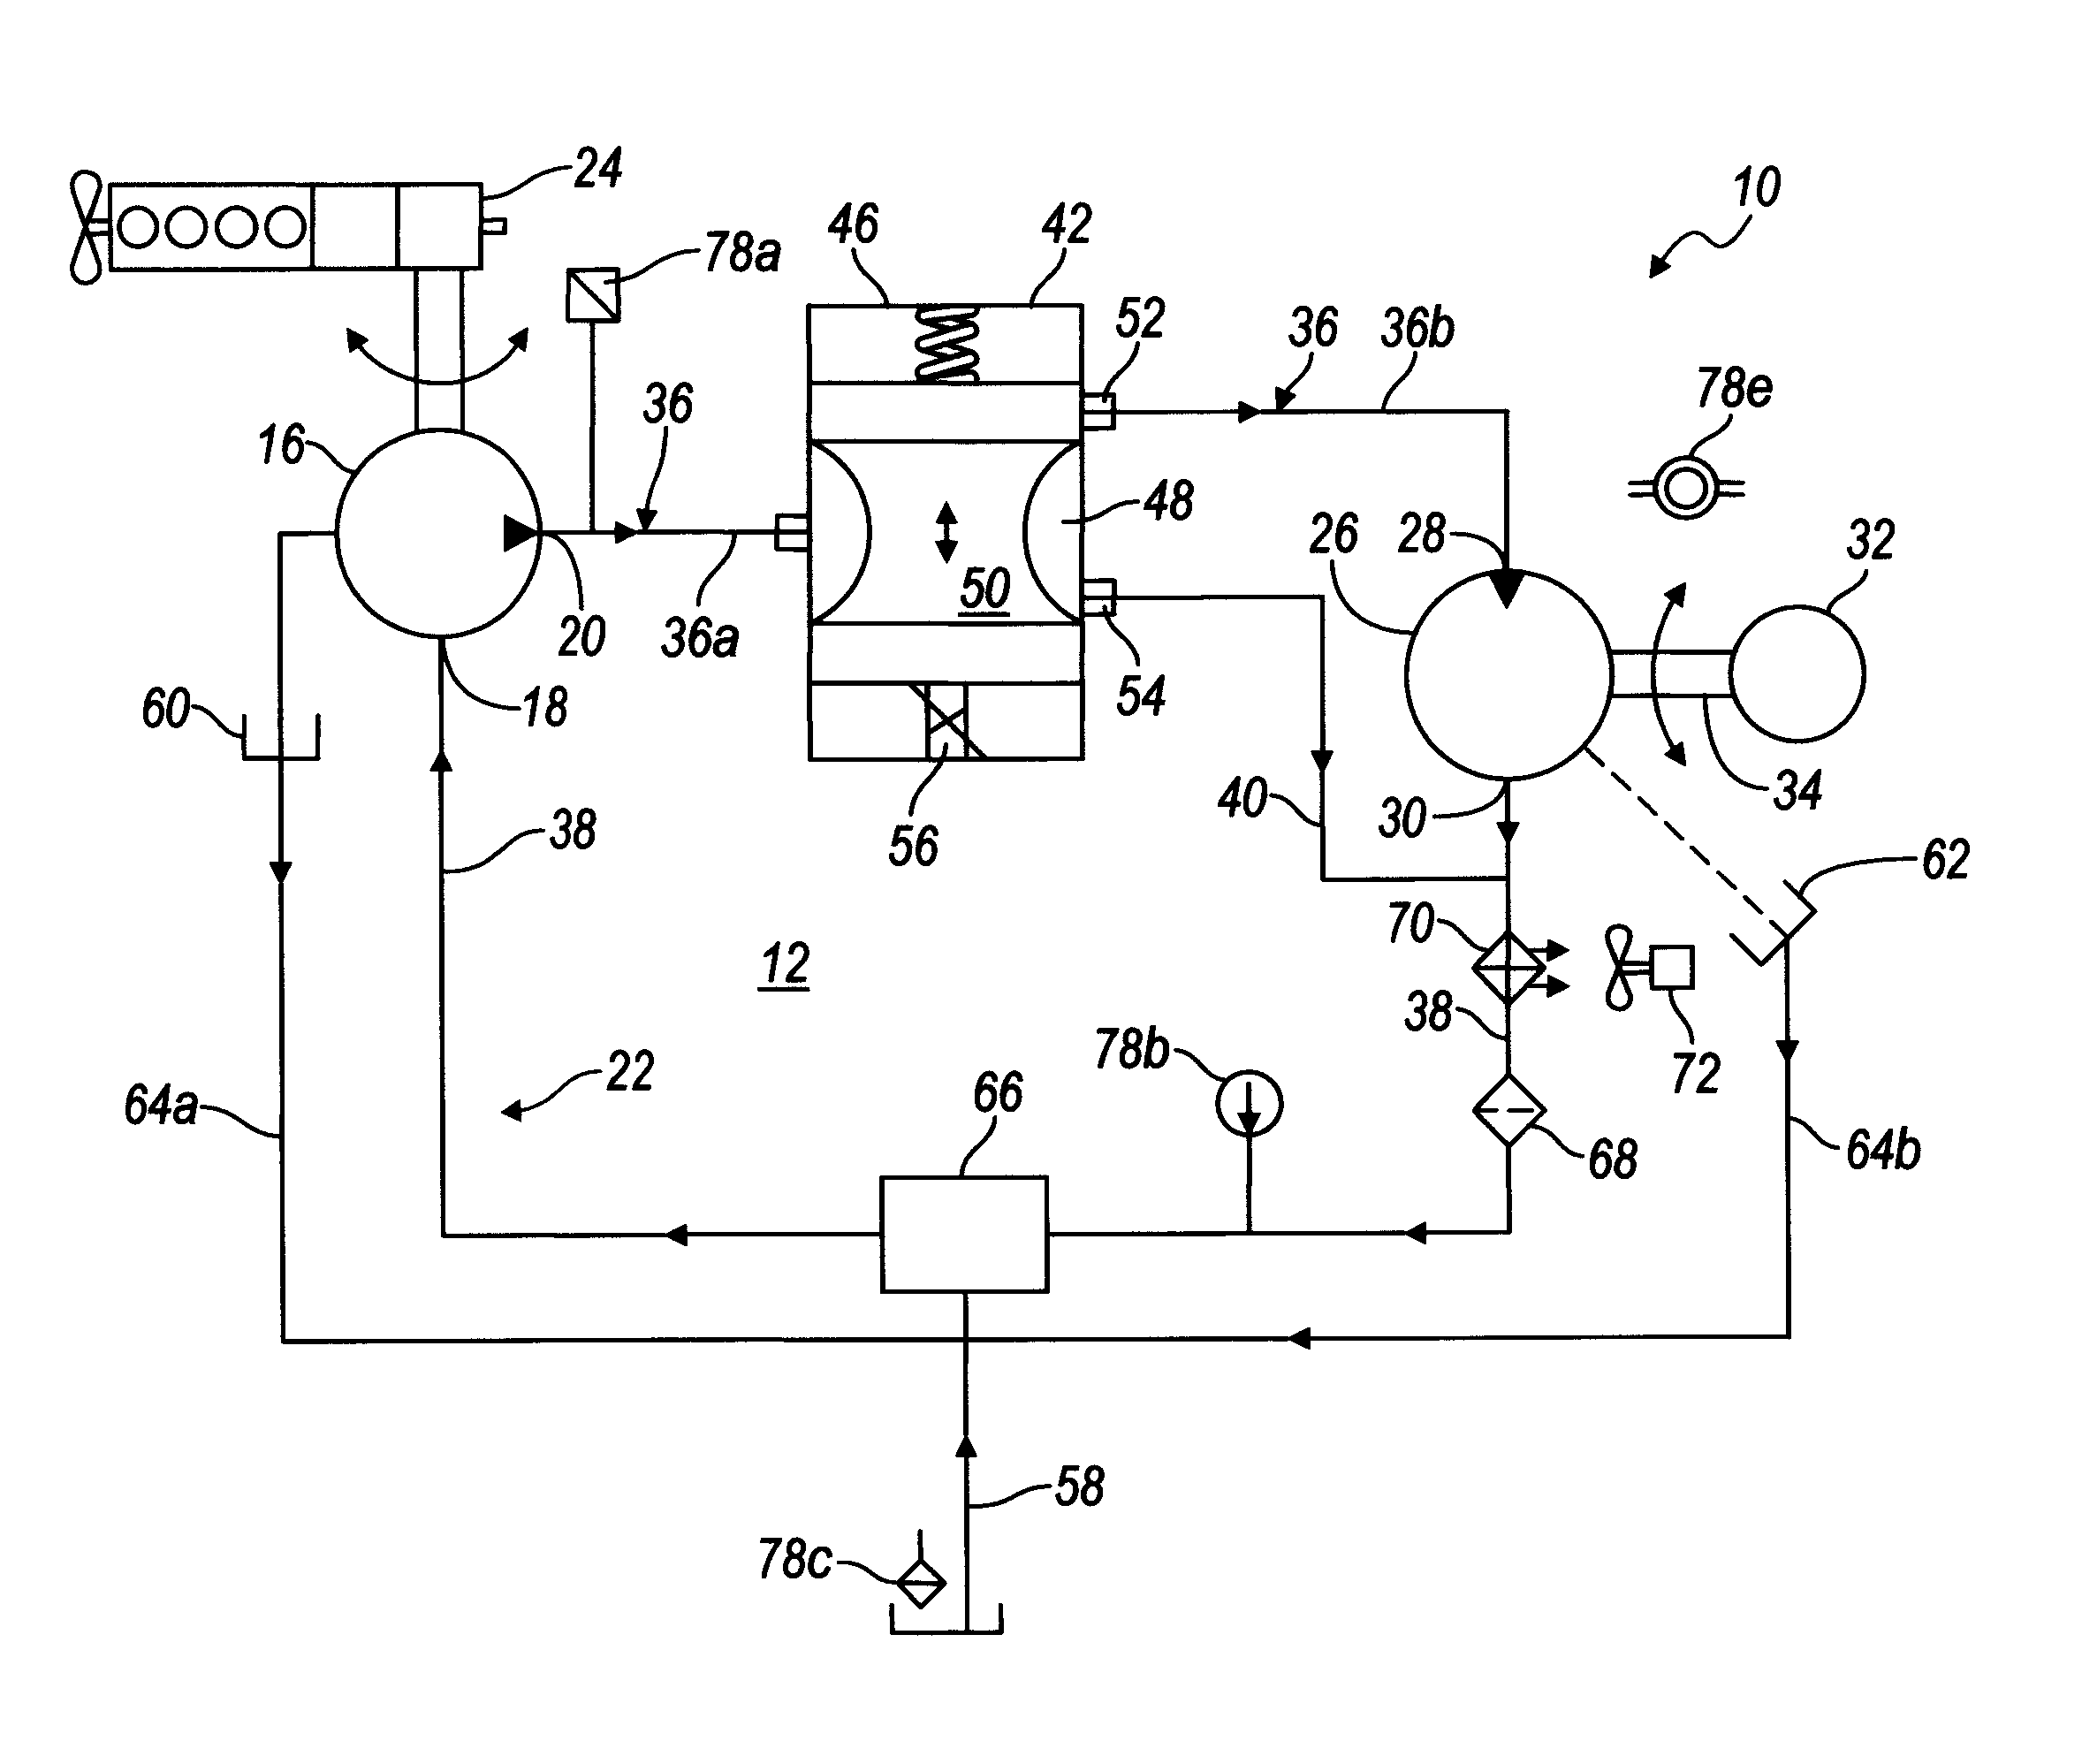 Electronic control for a hydraulically driven auxiliary power source